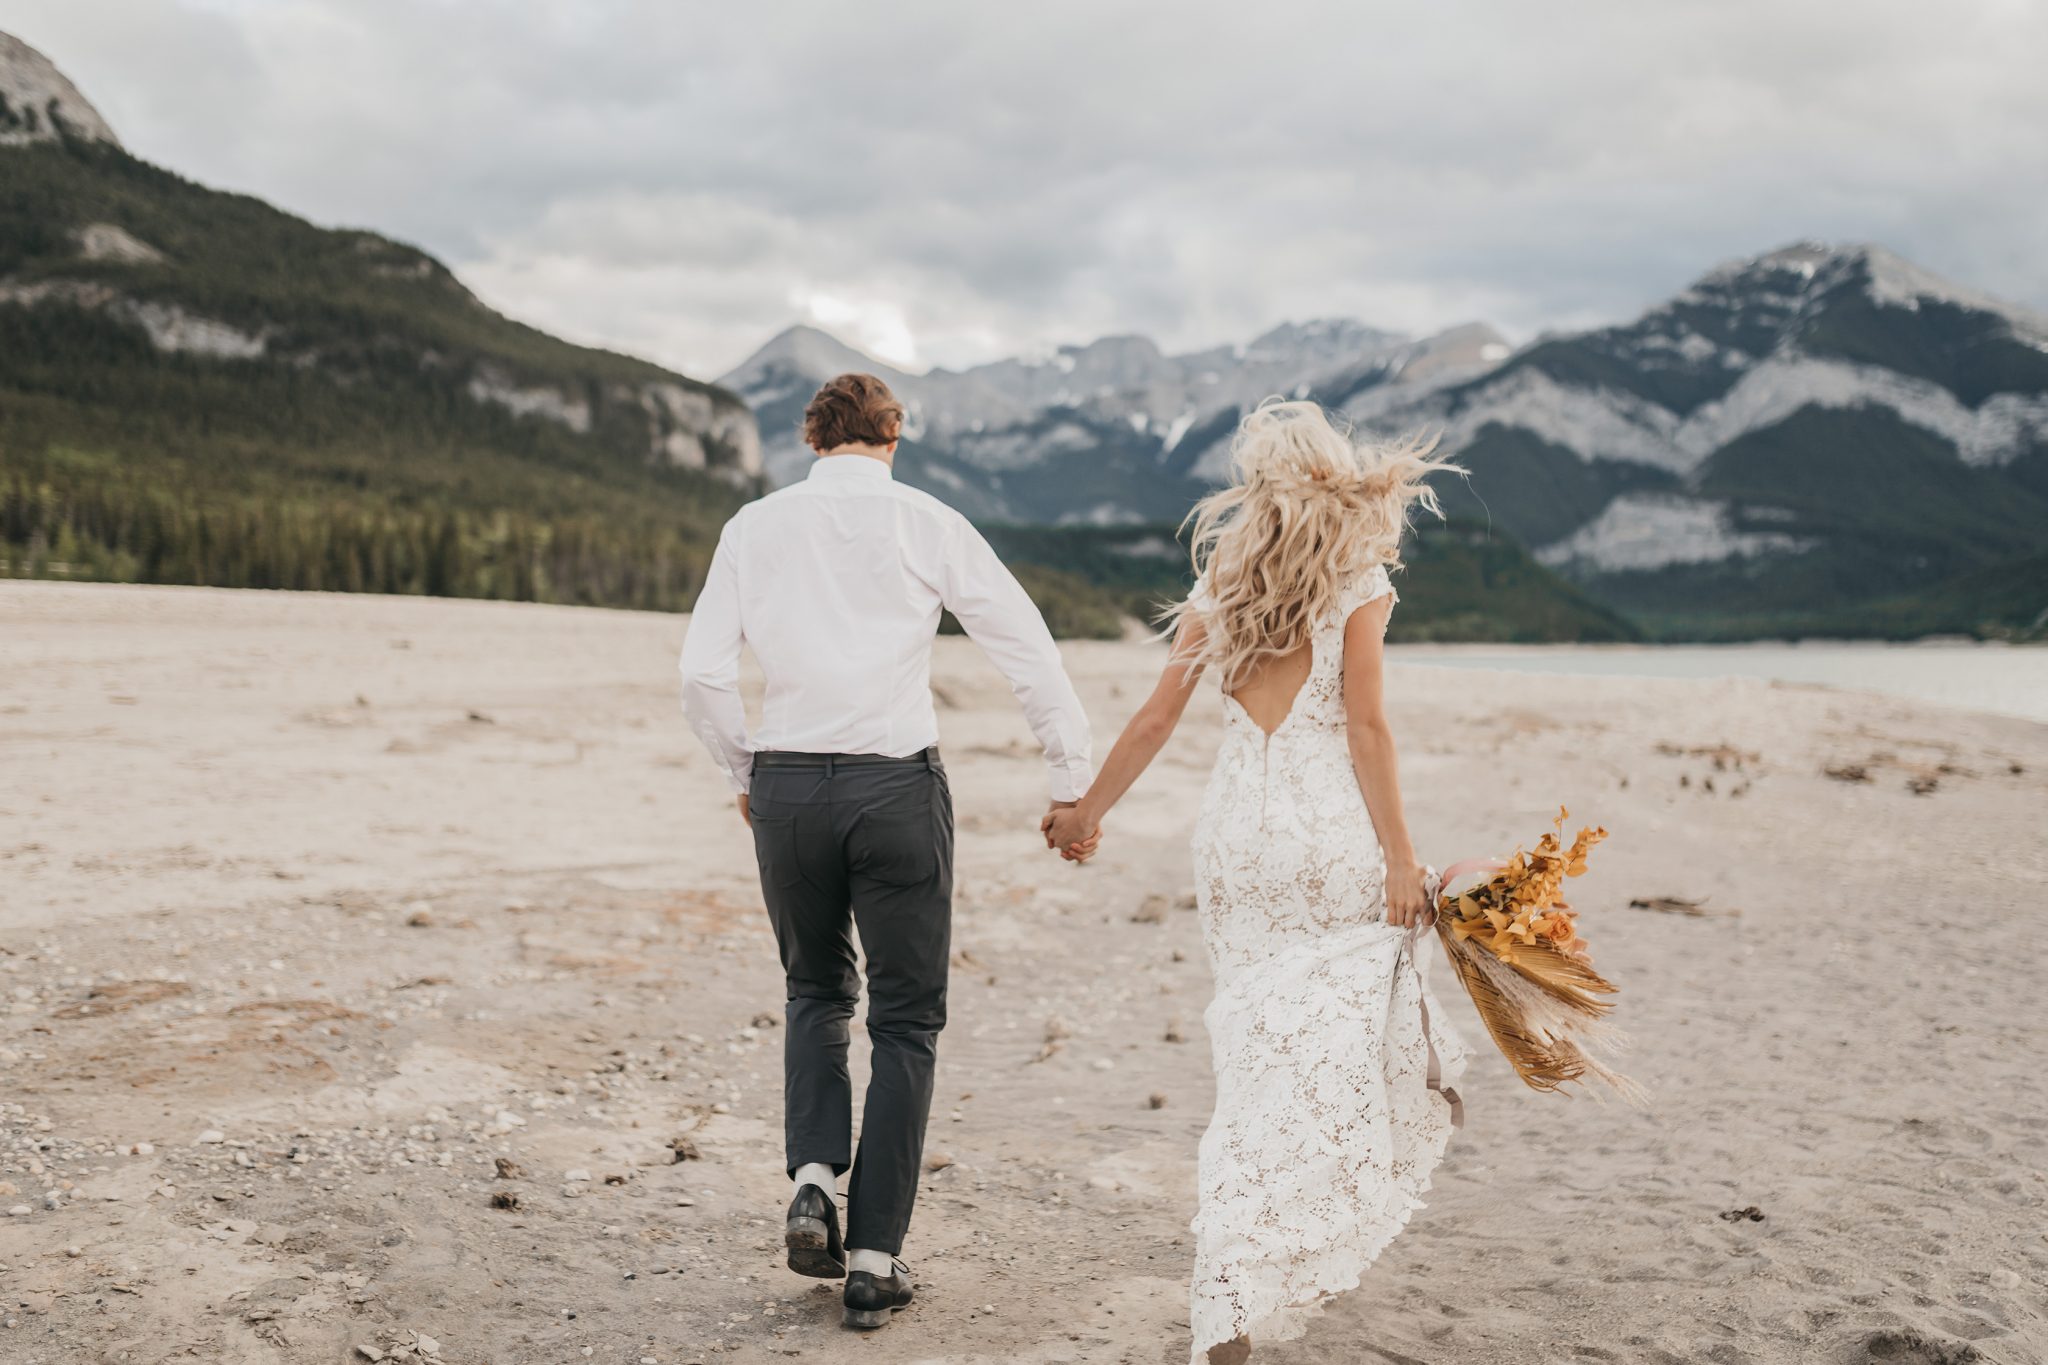 Bohemian Barrier Lake Elopement With Dried Palms & Understated Earth Tones - Elopement on Bronte Bride